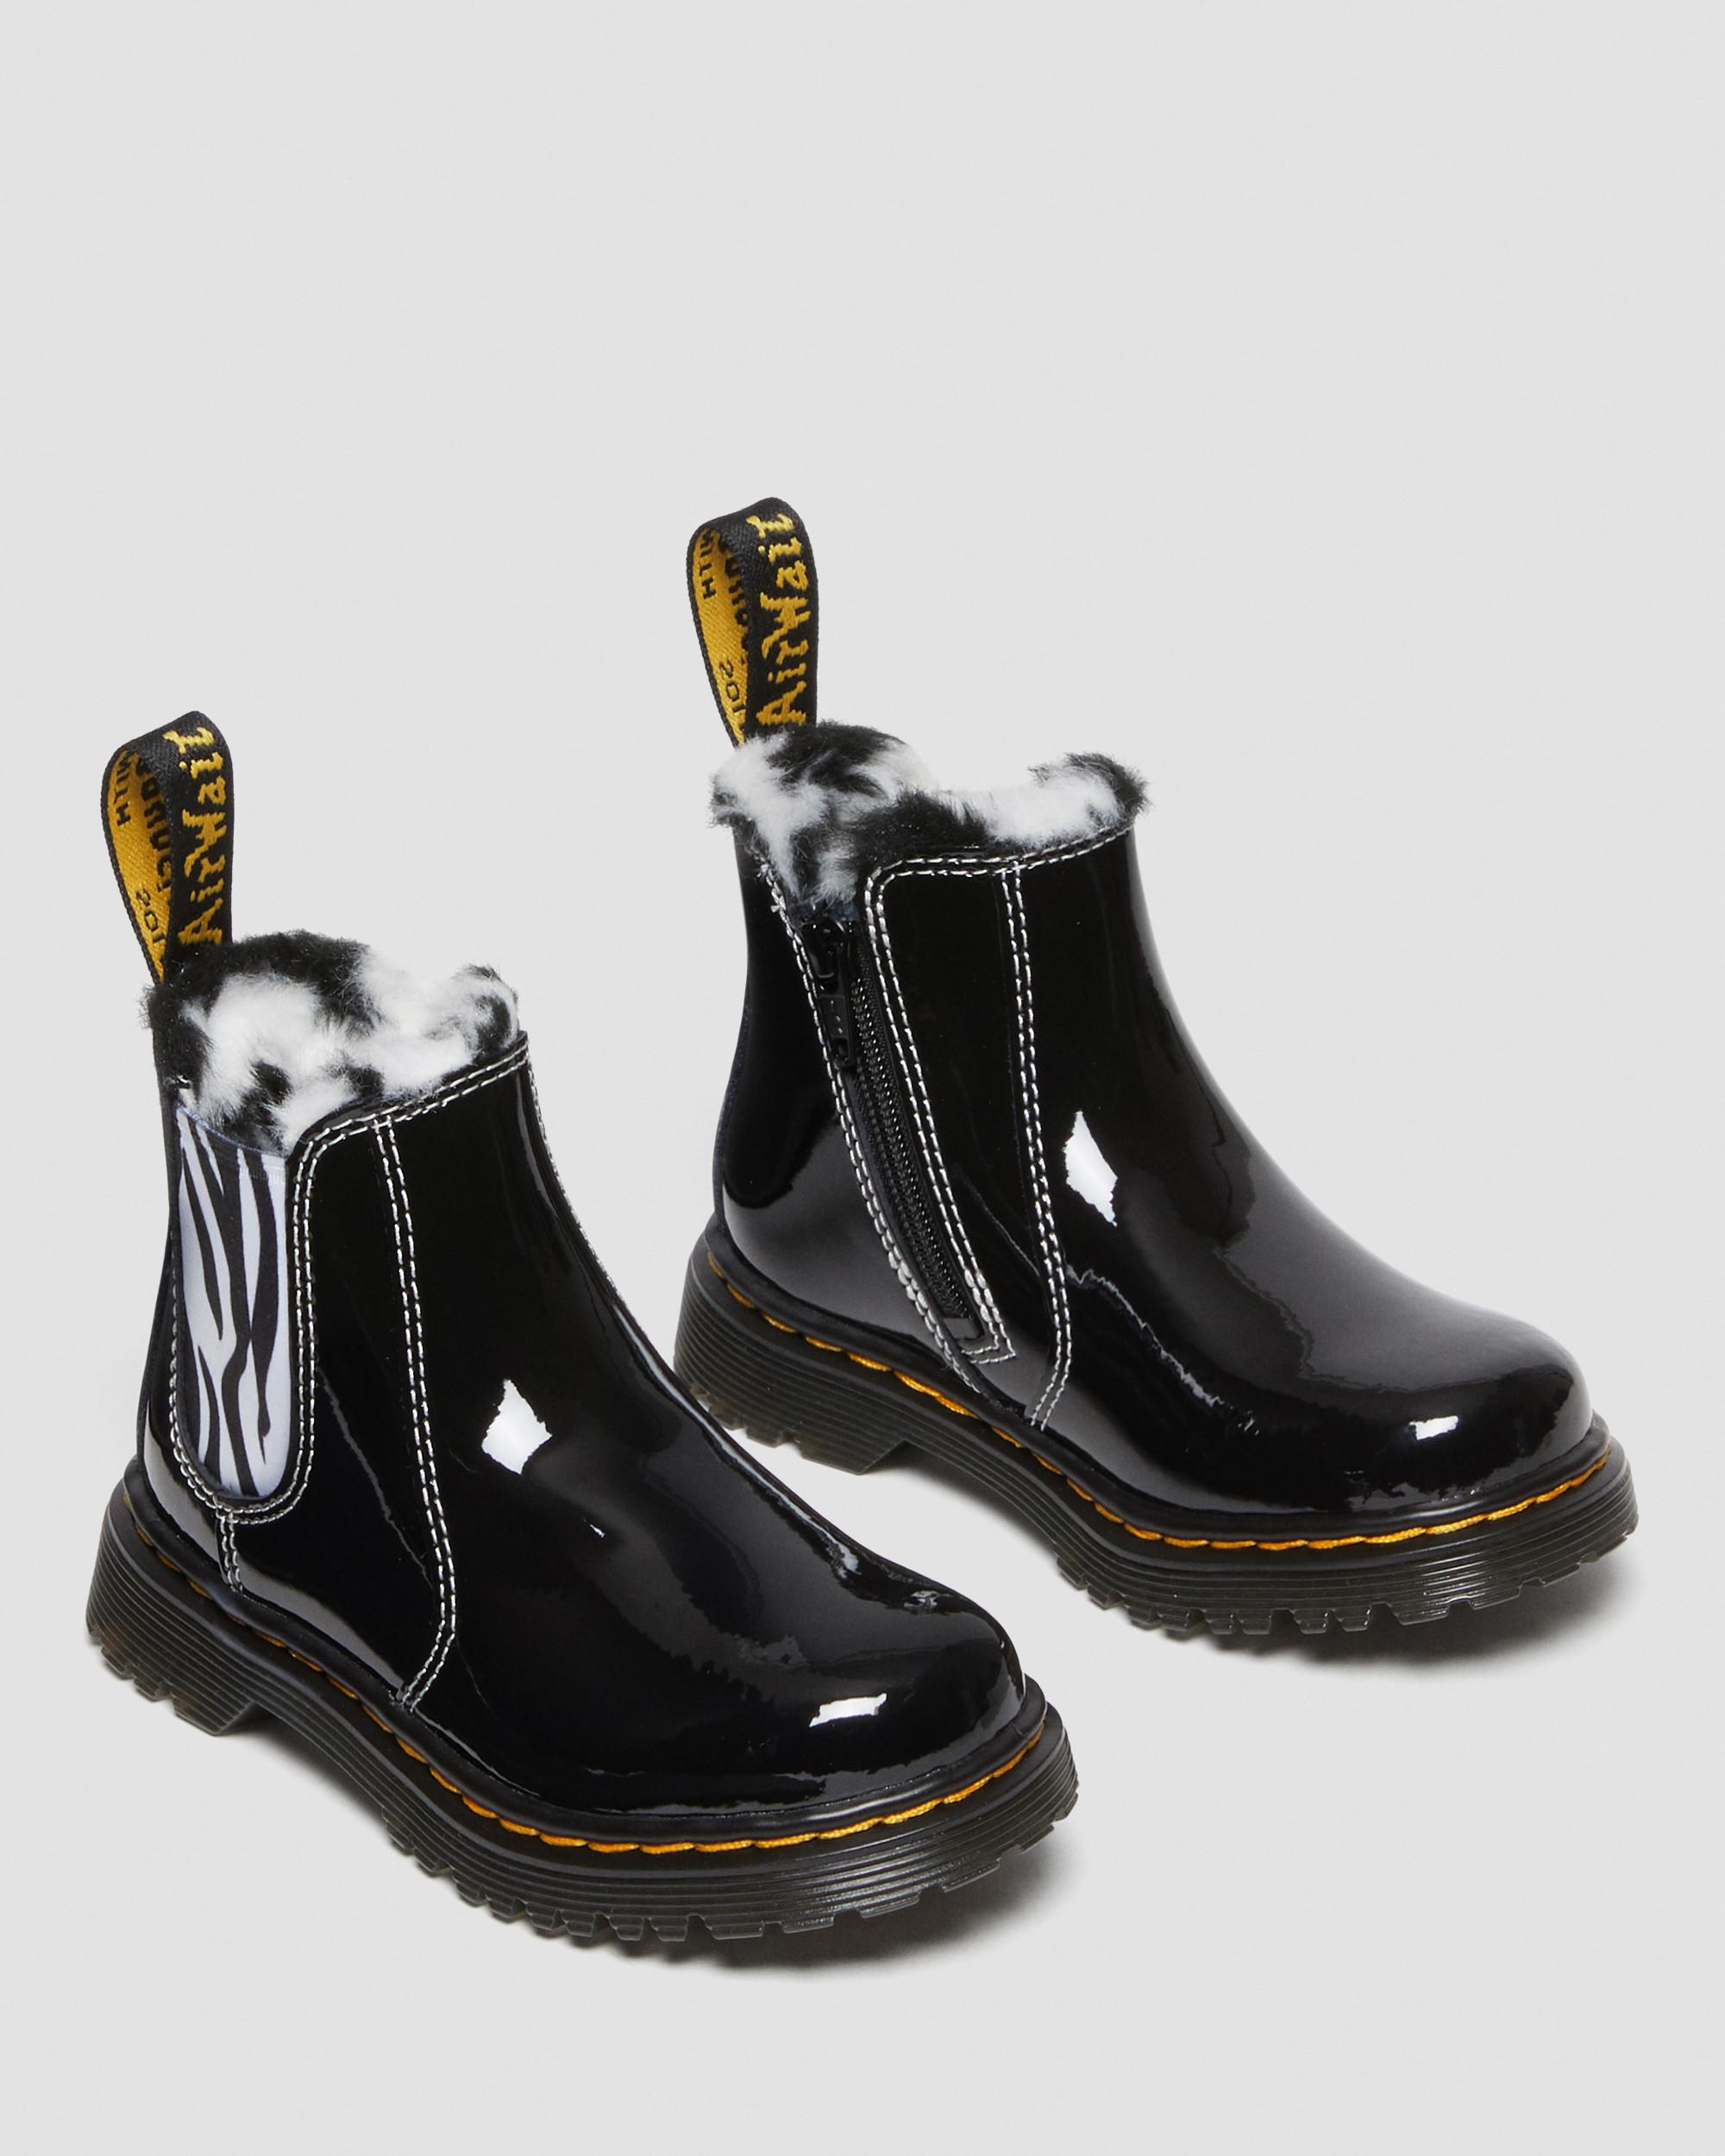 Toddler 2976 Leonore Patent Leather Chelsea BootsToddler 2976 Leonore Patent Leather Chelsea Boots Dr. Martens